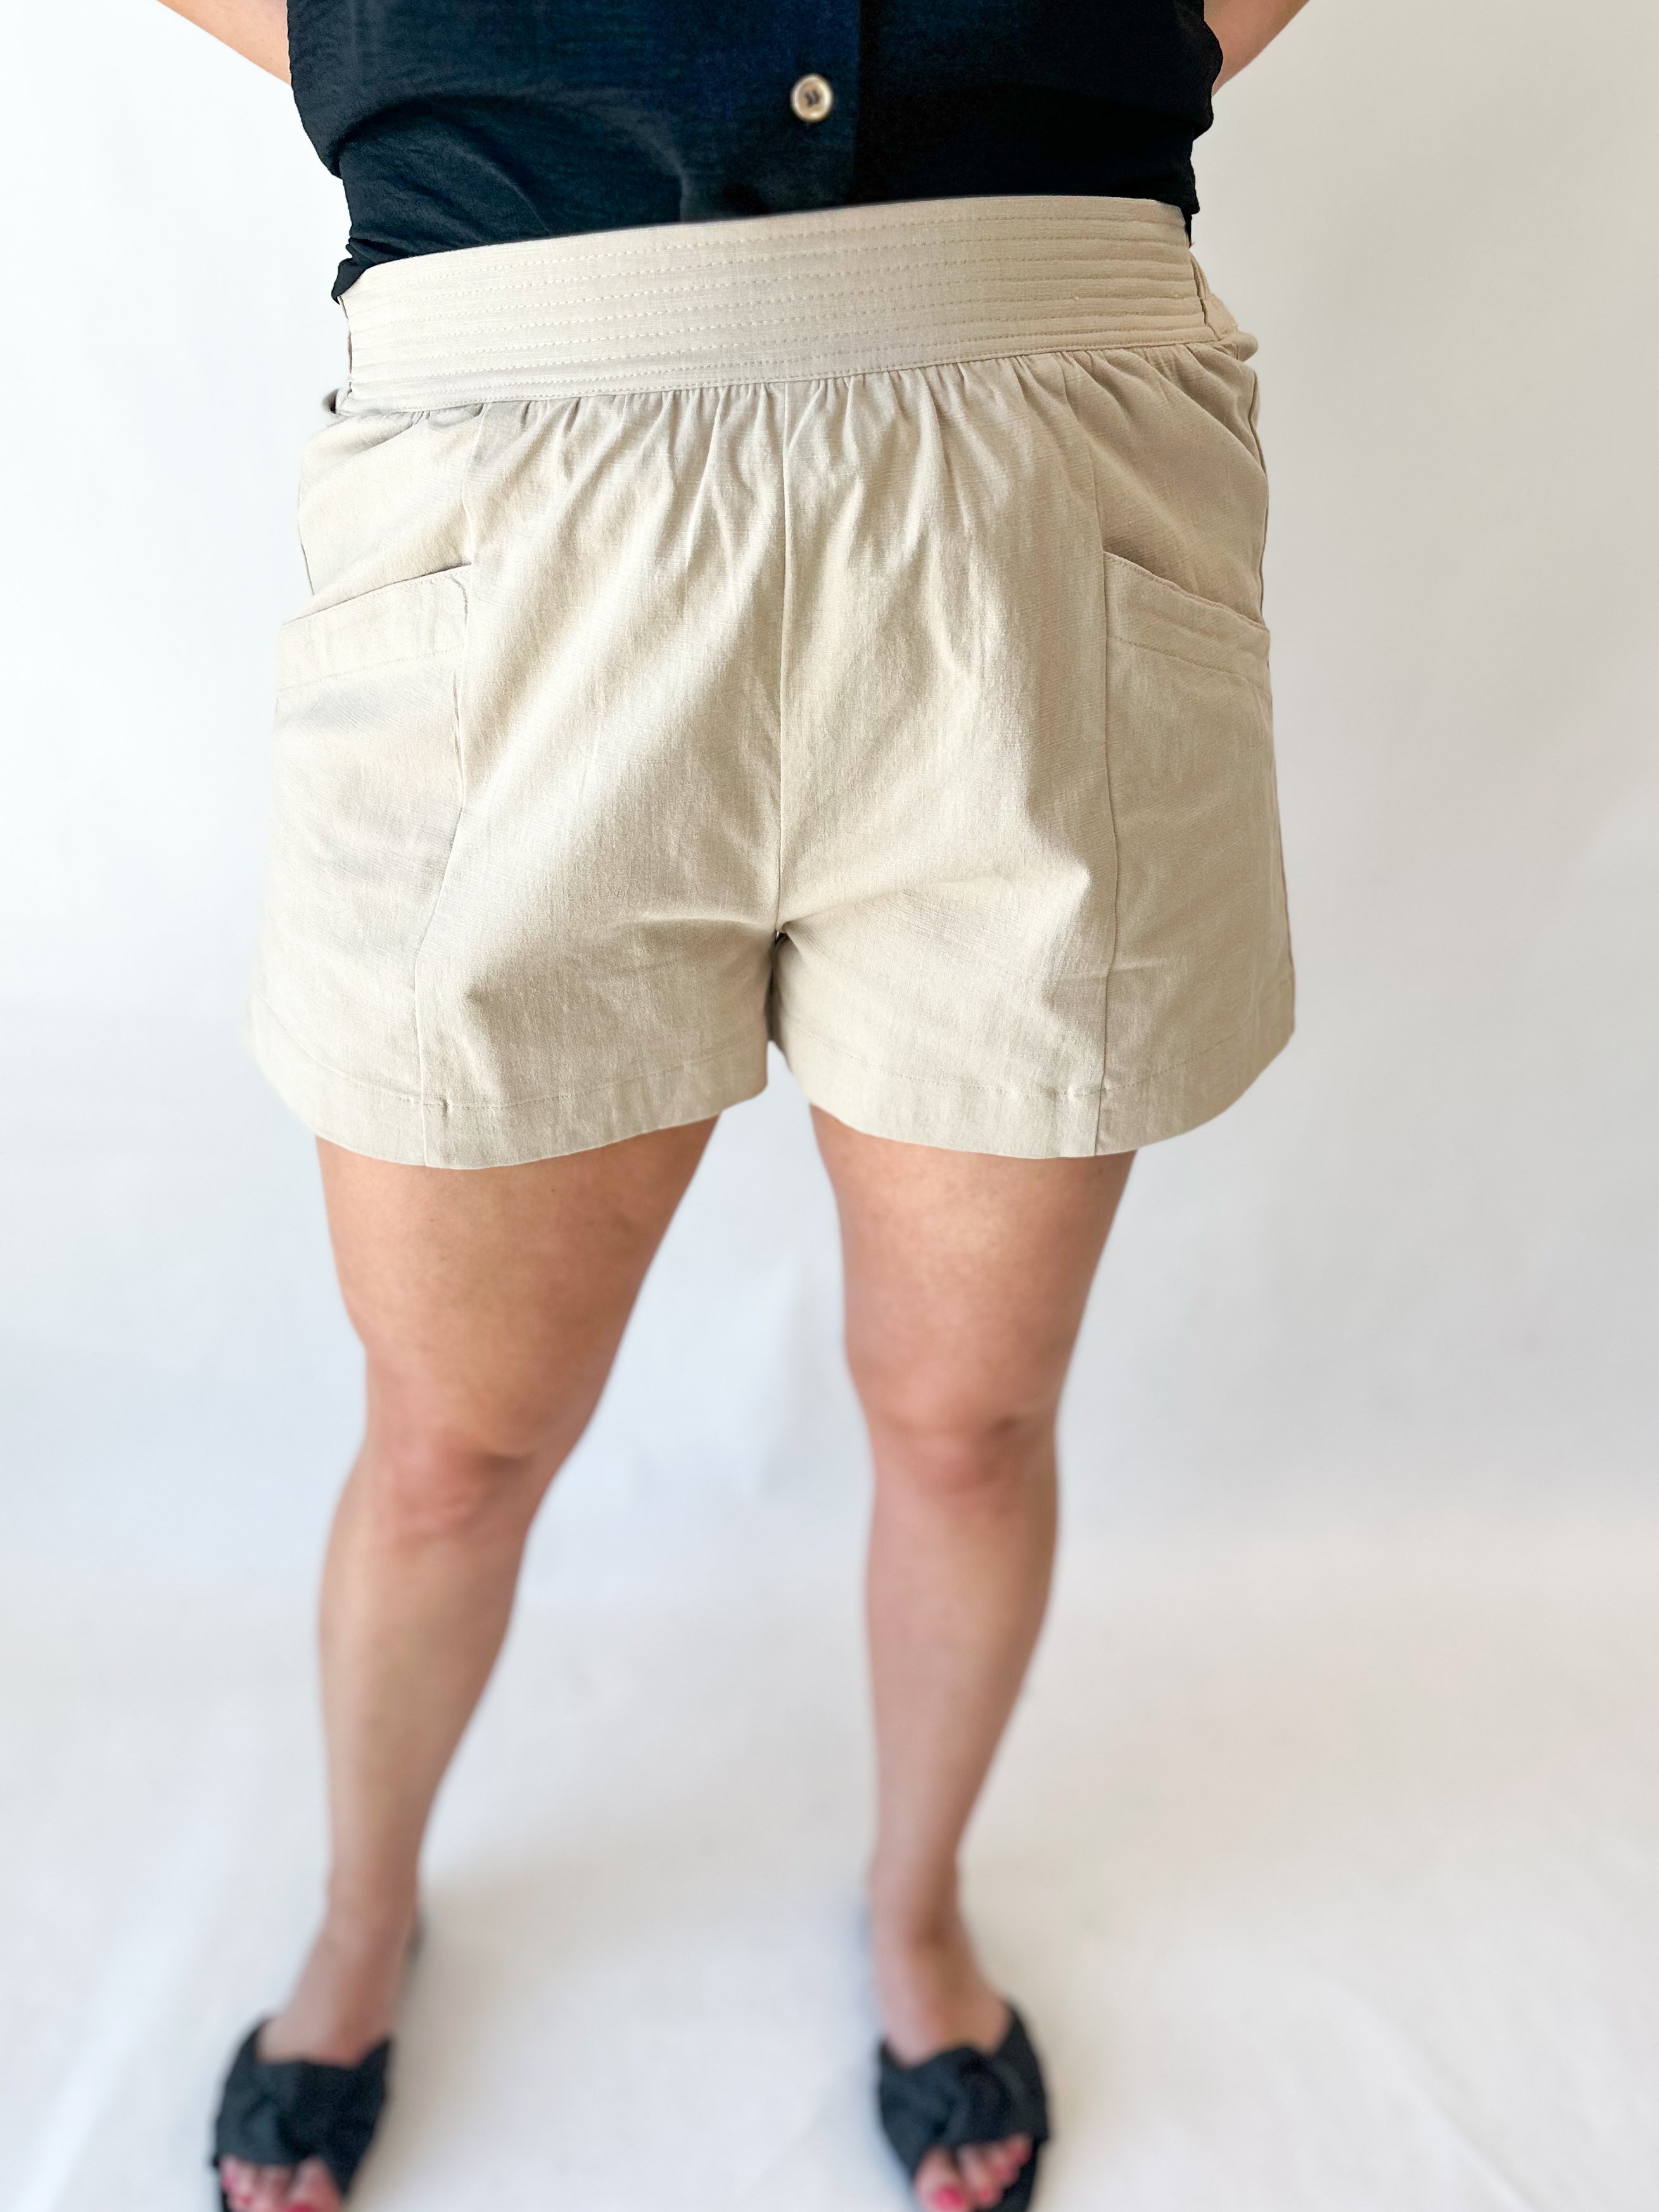 The Everyday Short - Tan-410 Shorts/Skirts-ENTRO-July & June Women's Fashion Boutique Located in San Antonio, Texas